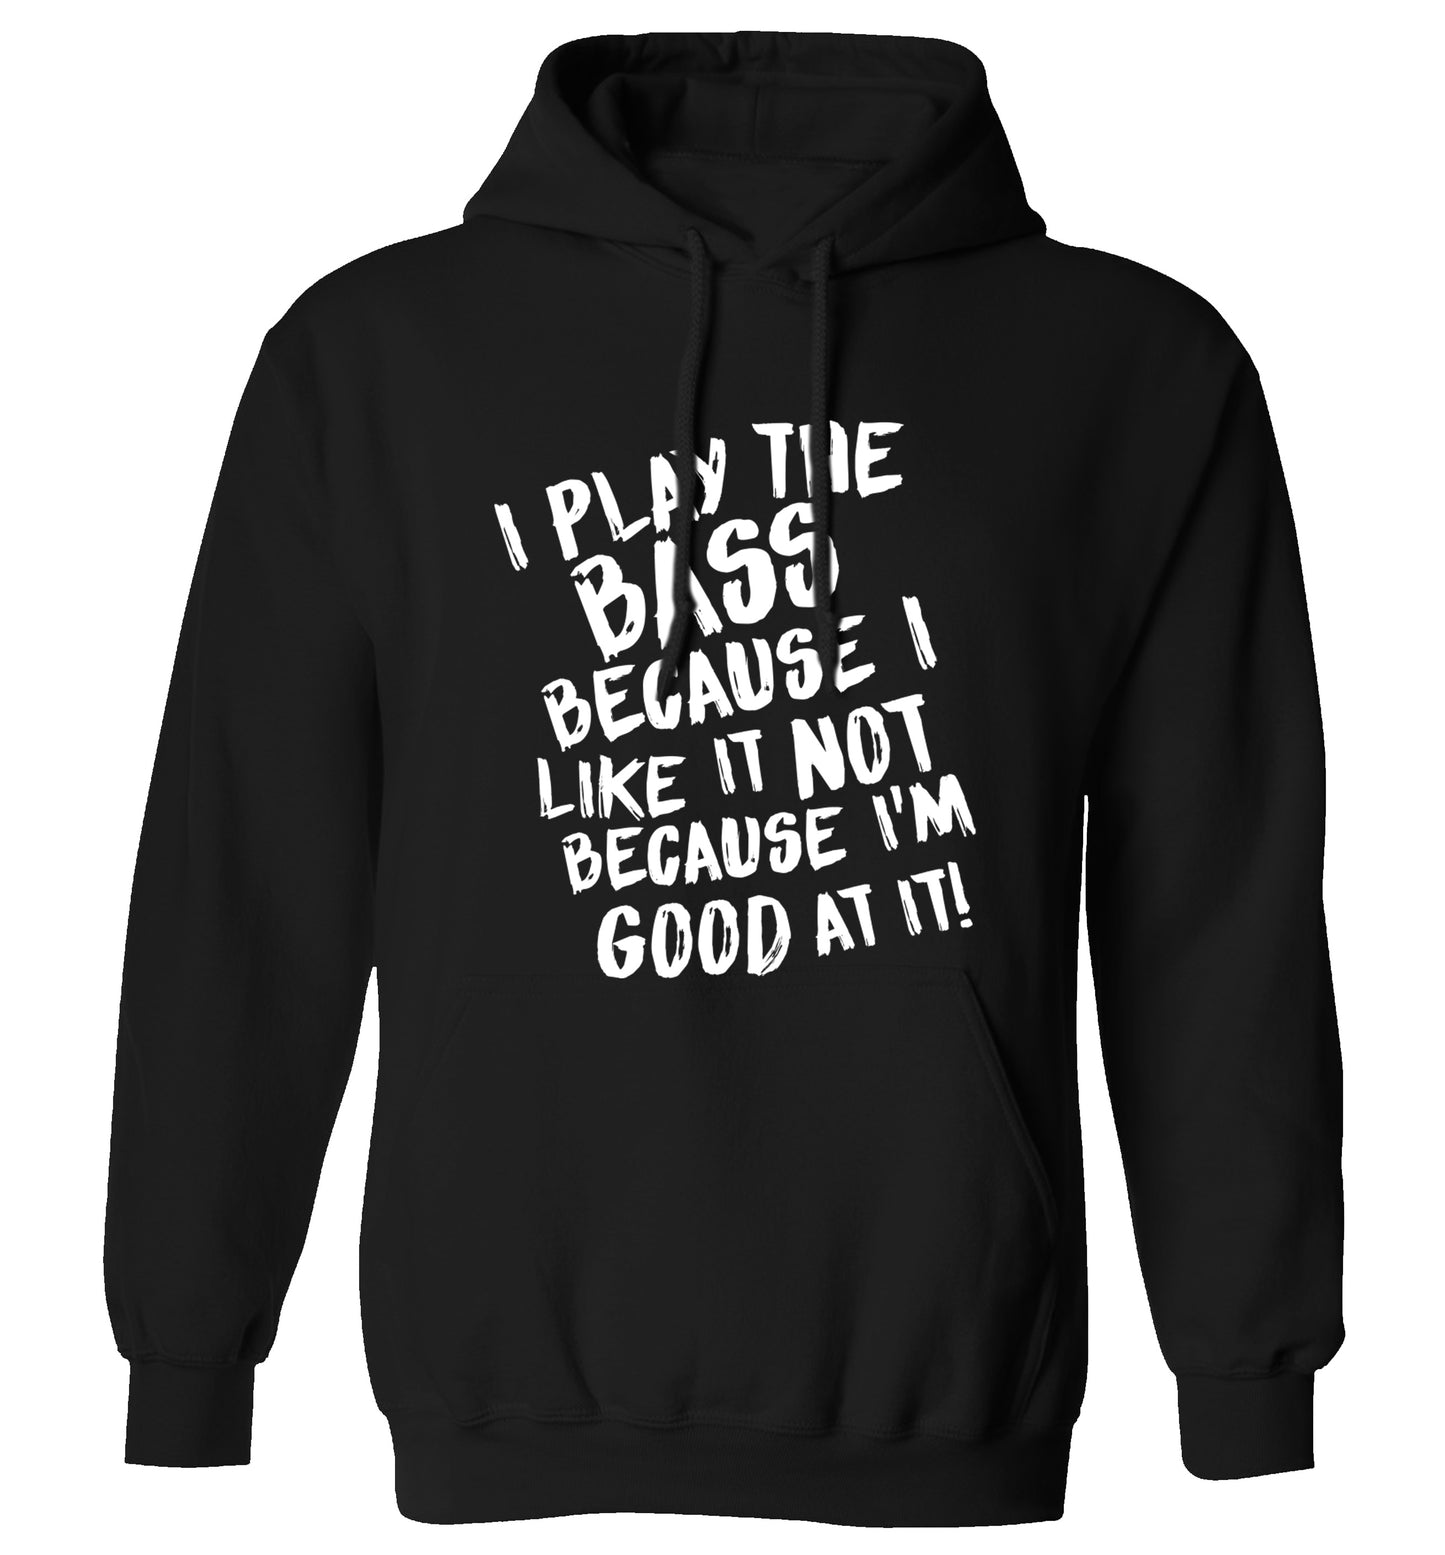 I play the bass because I like it not because I'm good at it adults unisex black hoodie 2XL